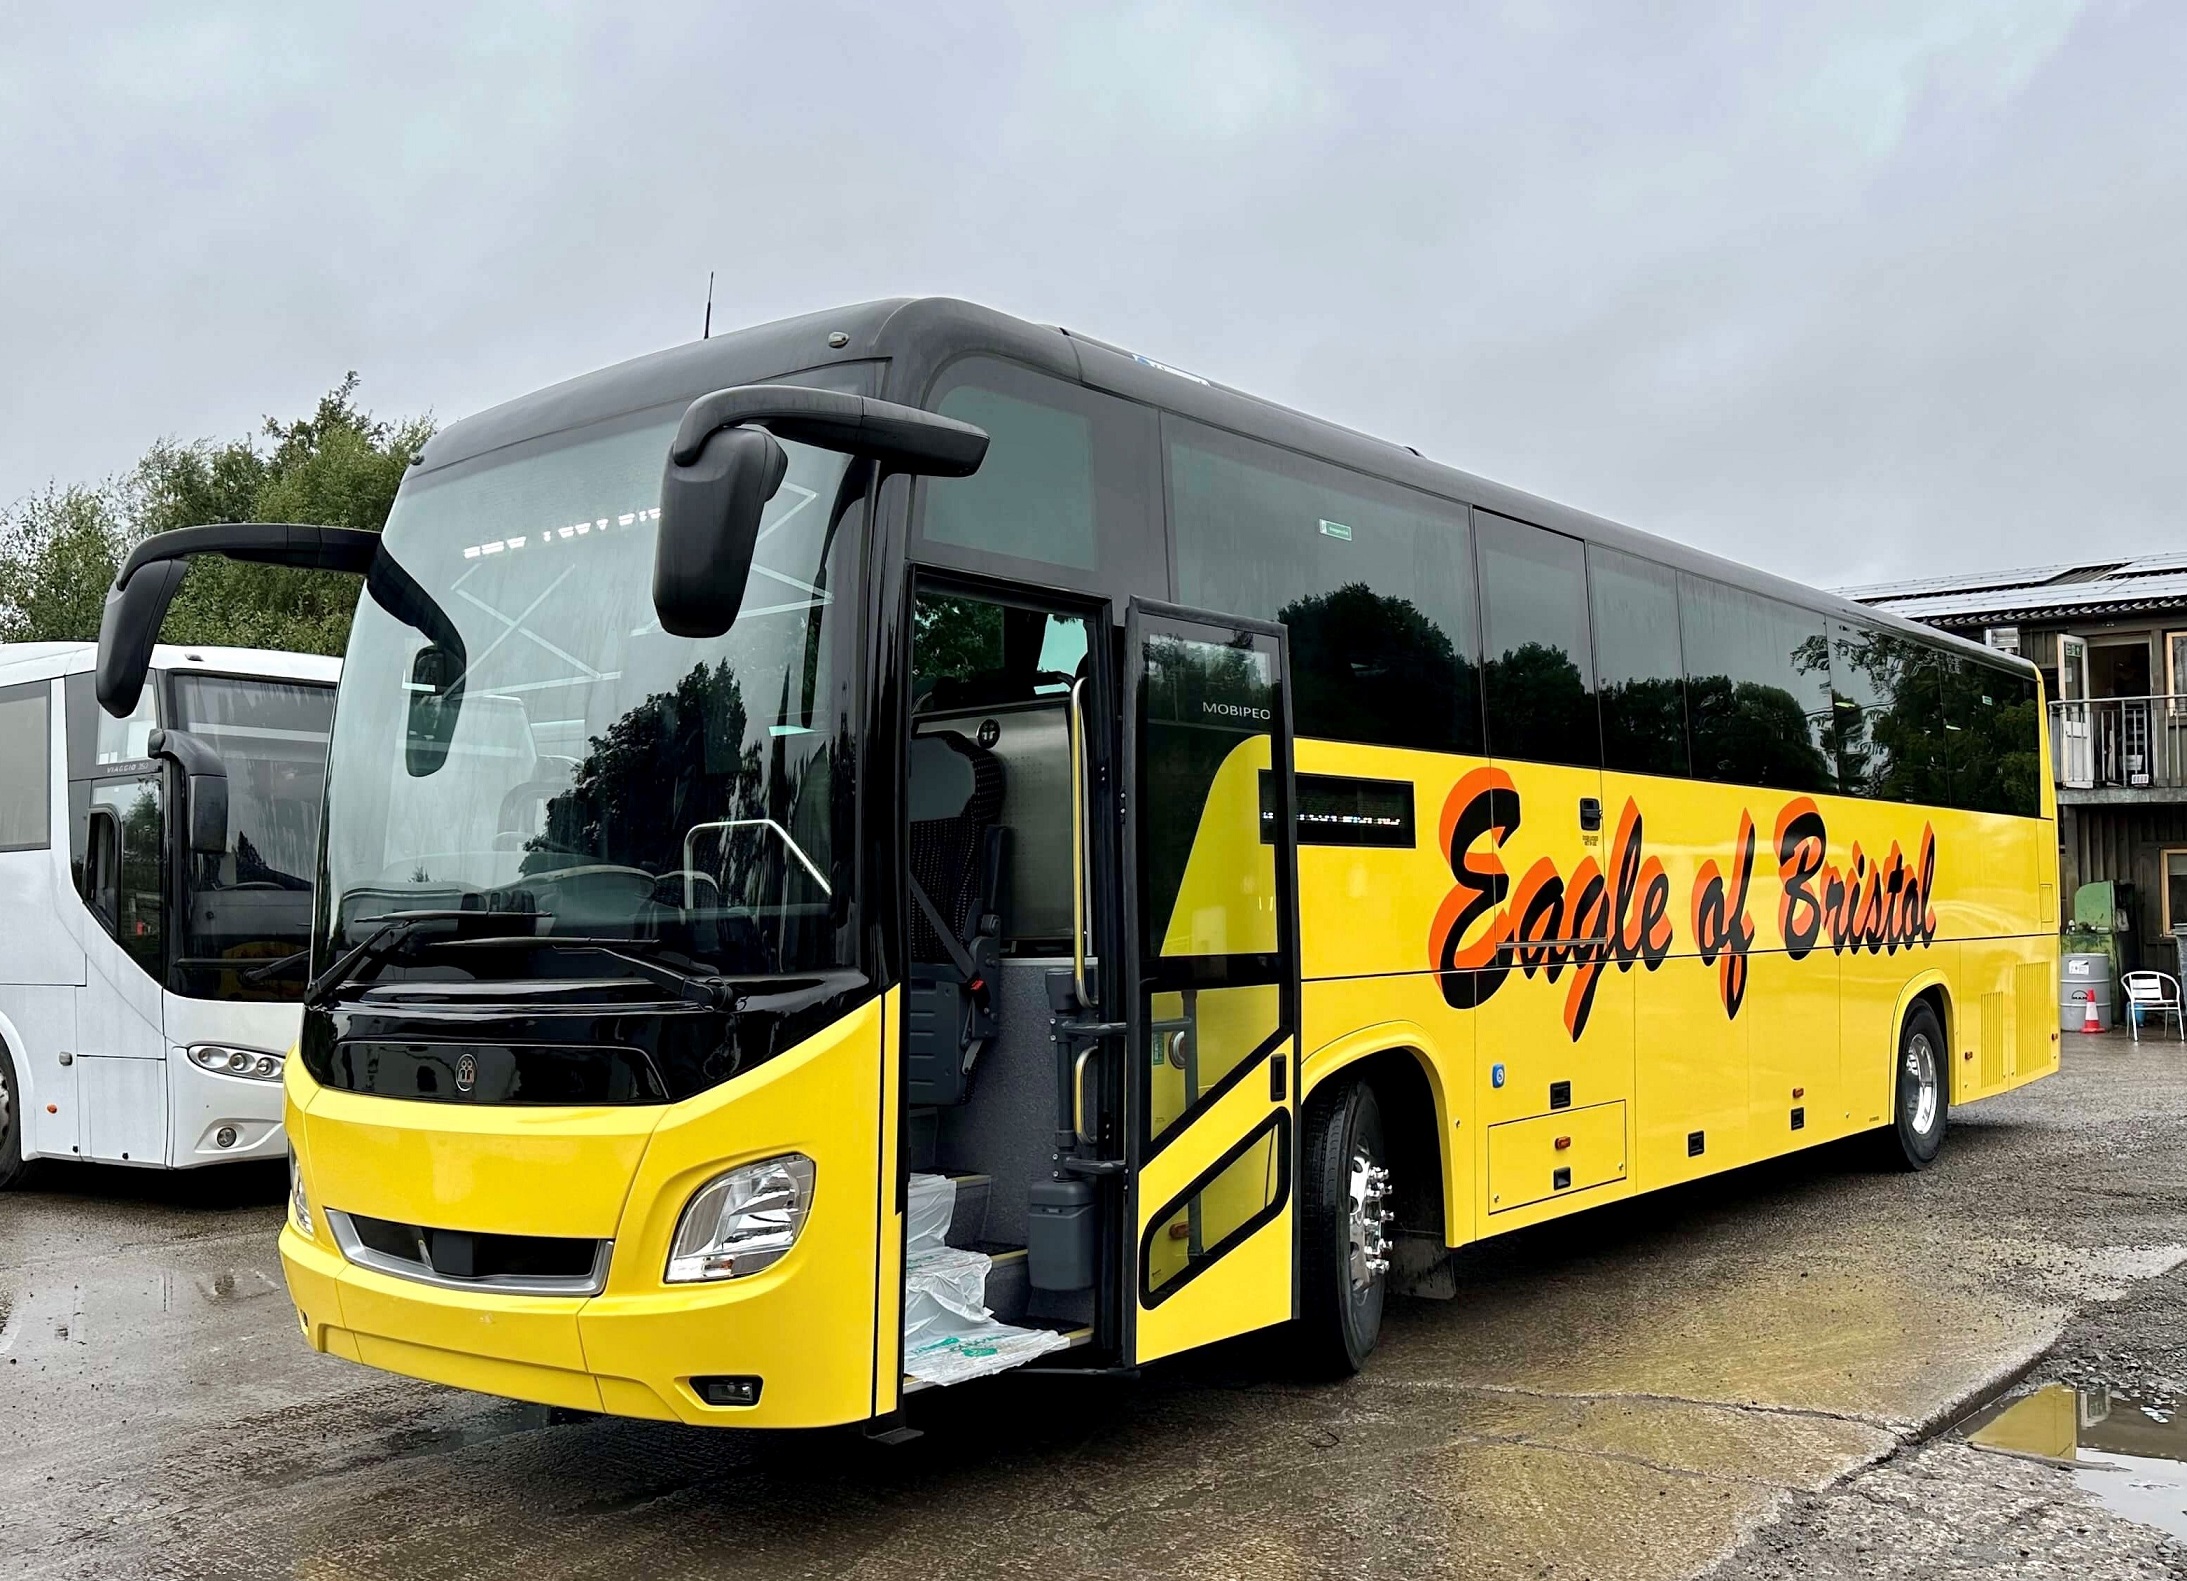 Scania MOBIpeople coach with Eagle of Bristol